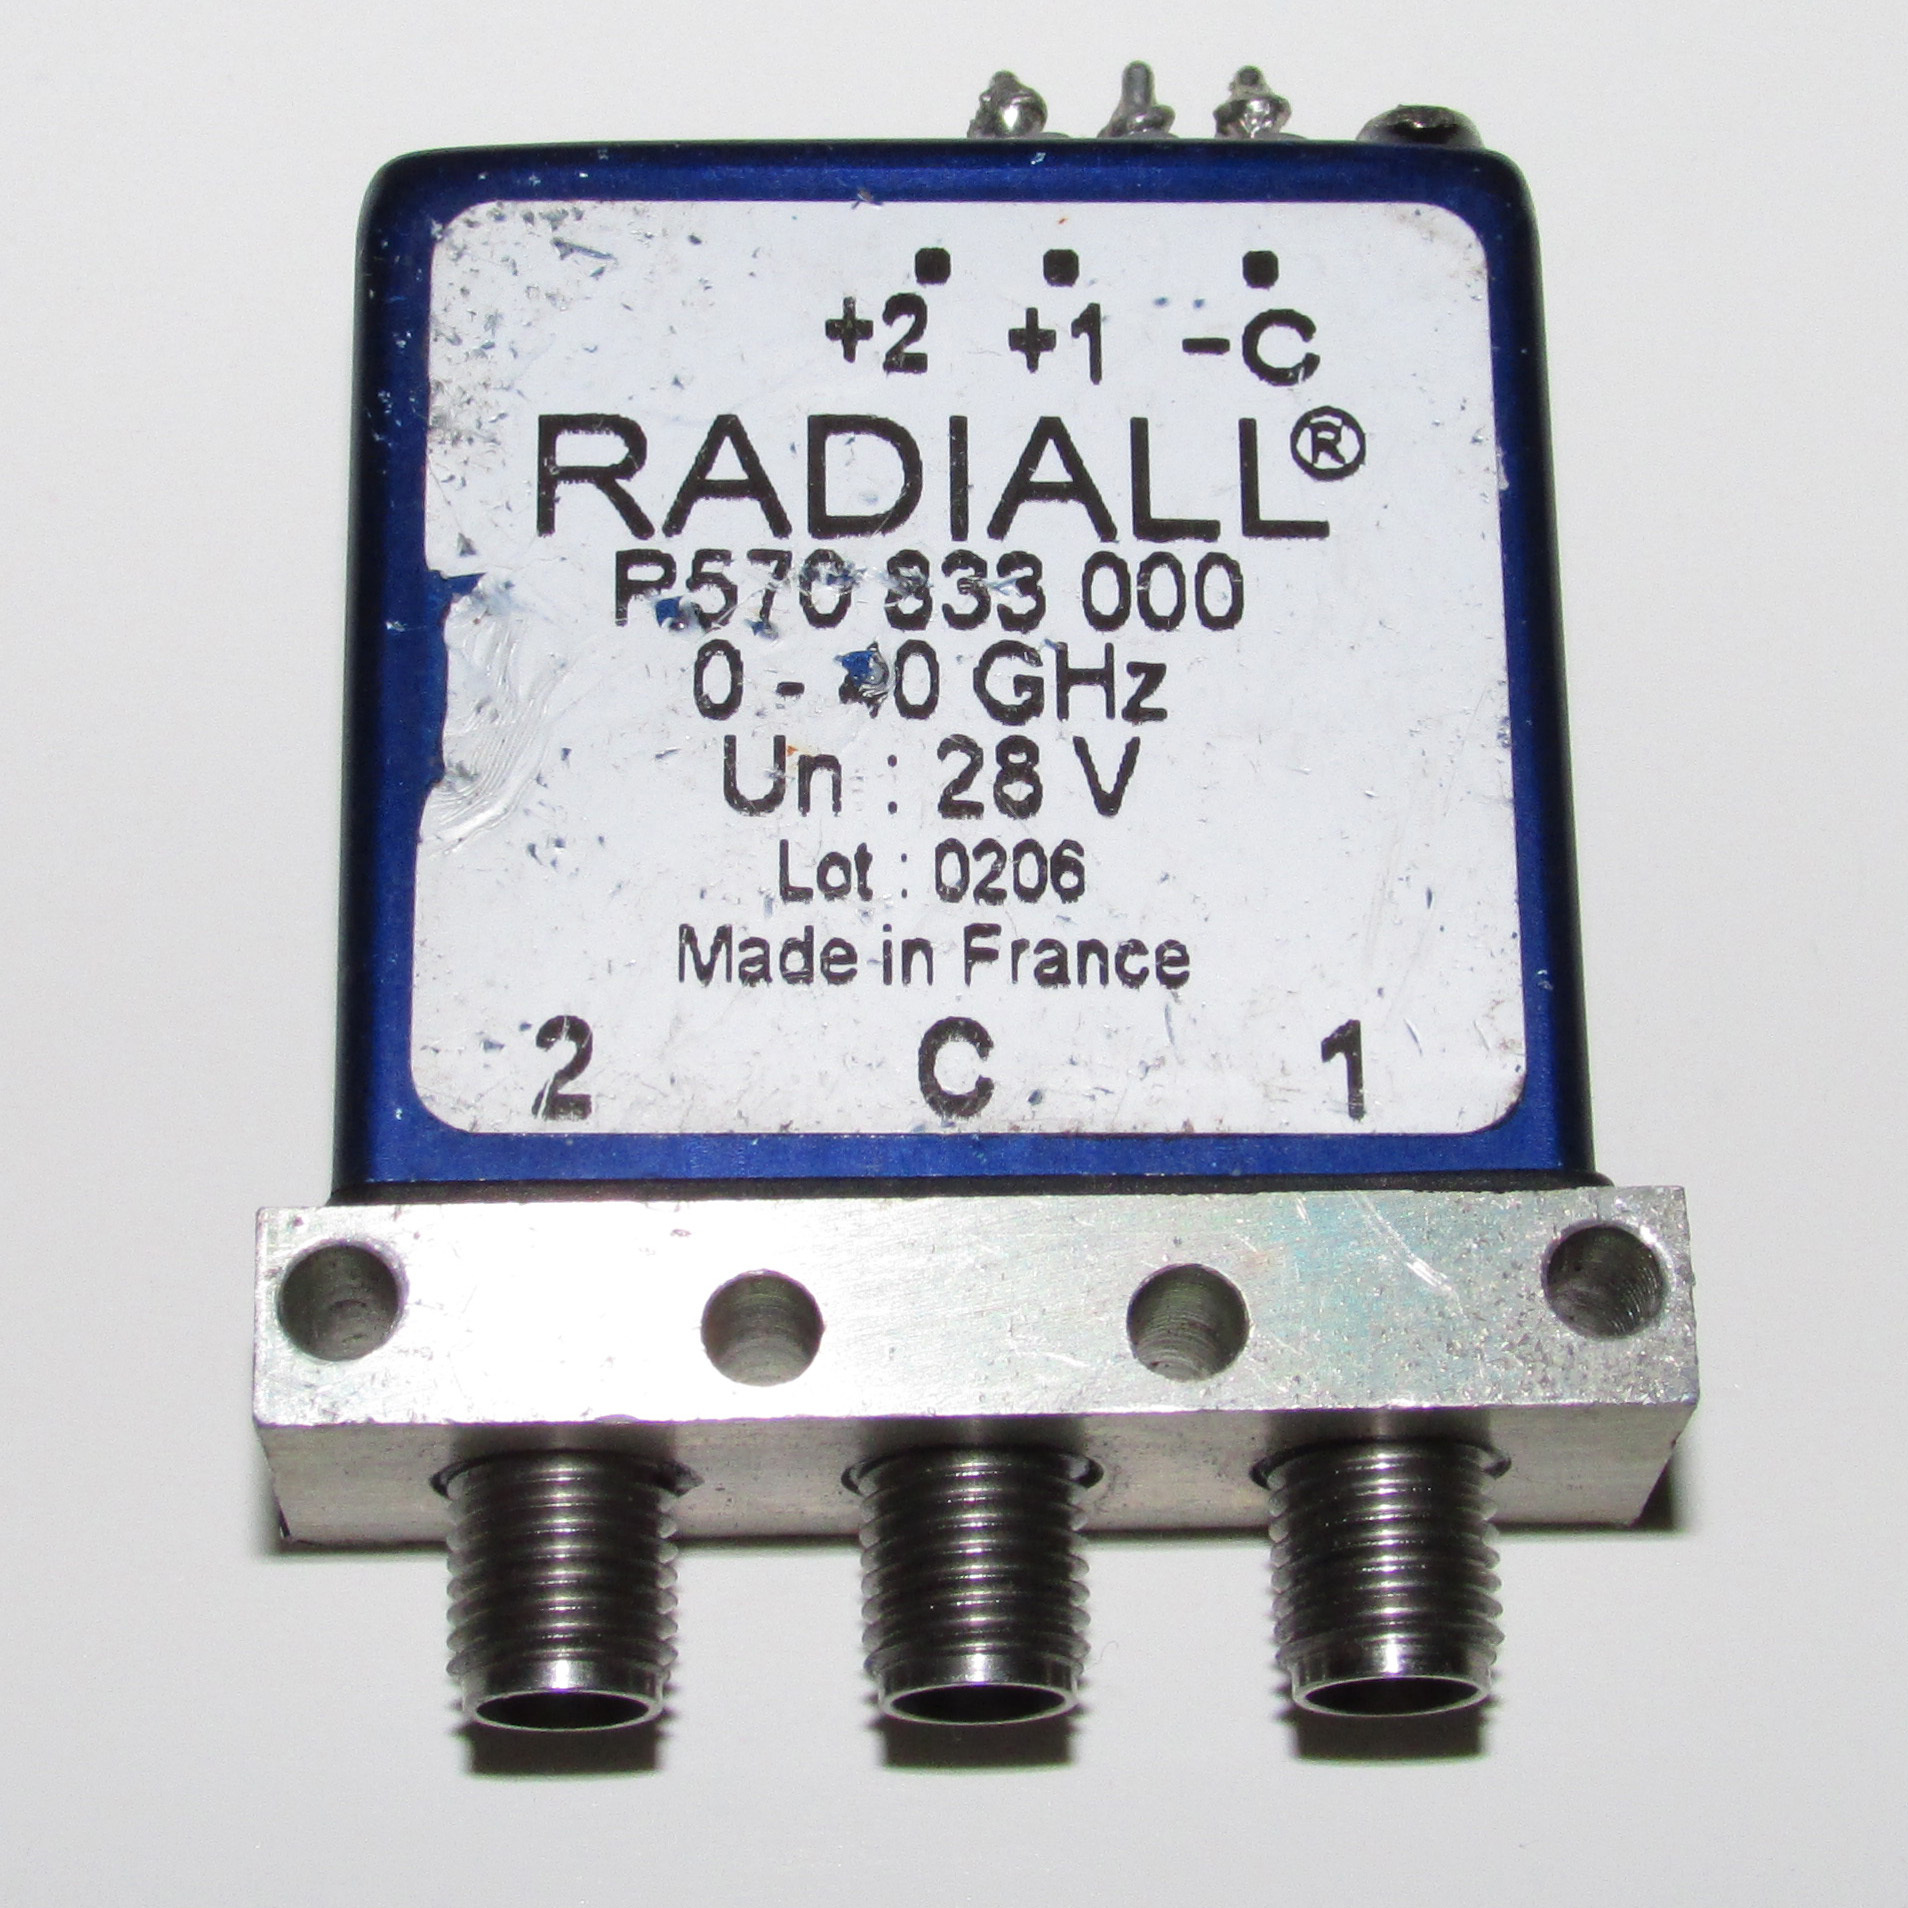 RADIALL R570833000 DC-40GHz 28V single pole double throw RF microwave switch (self-holding)